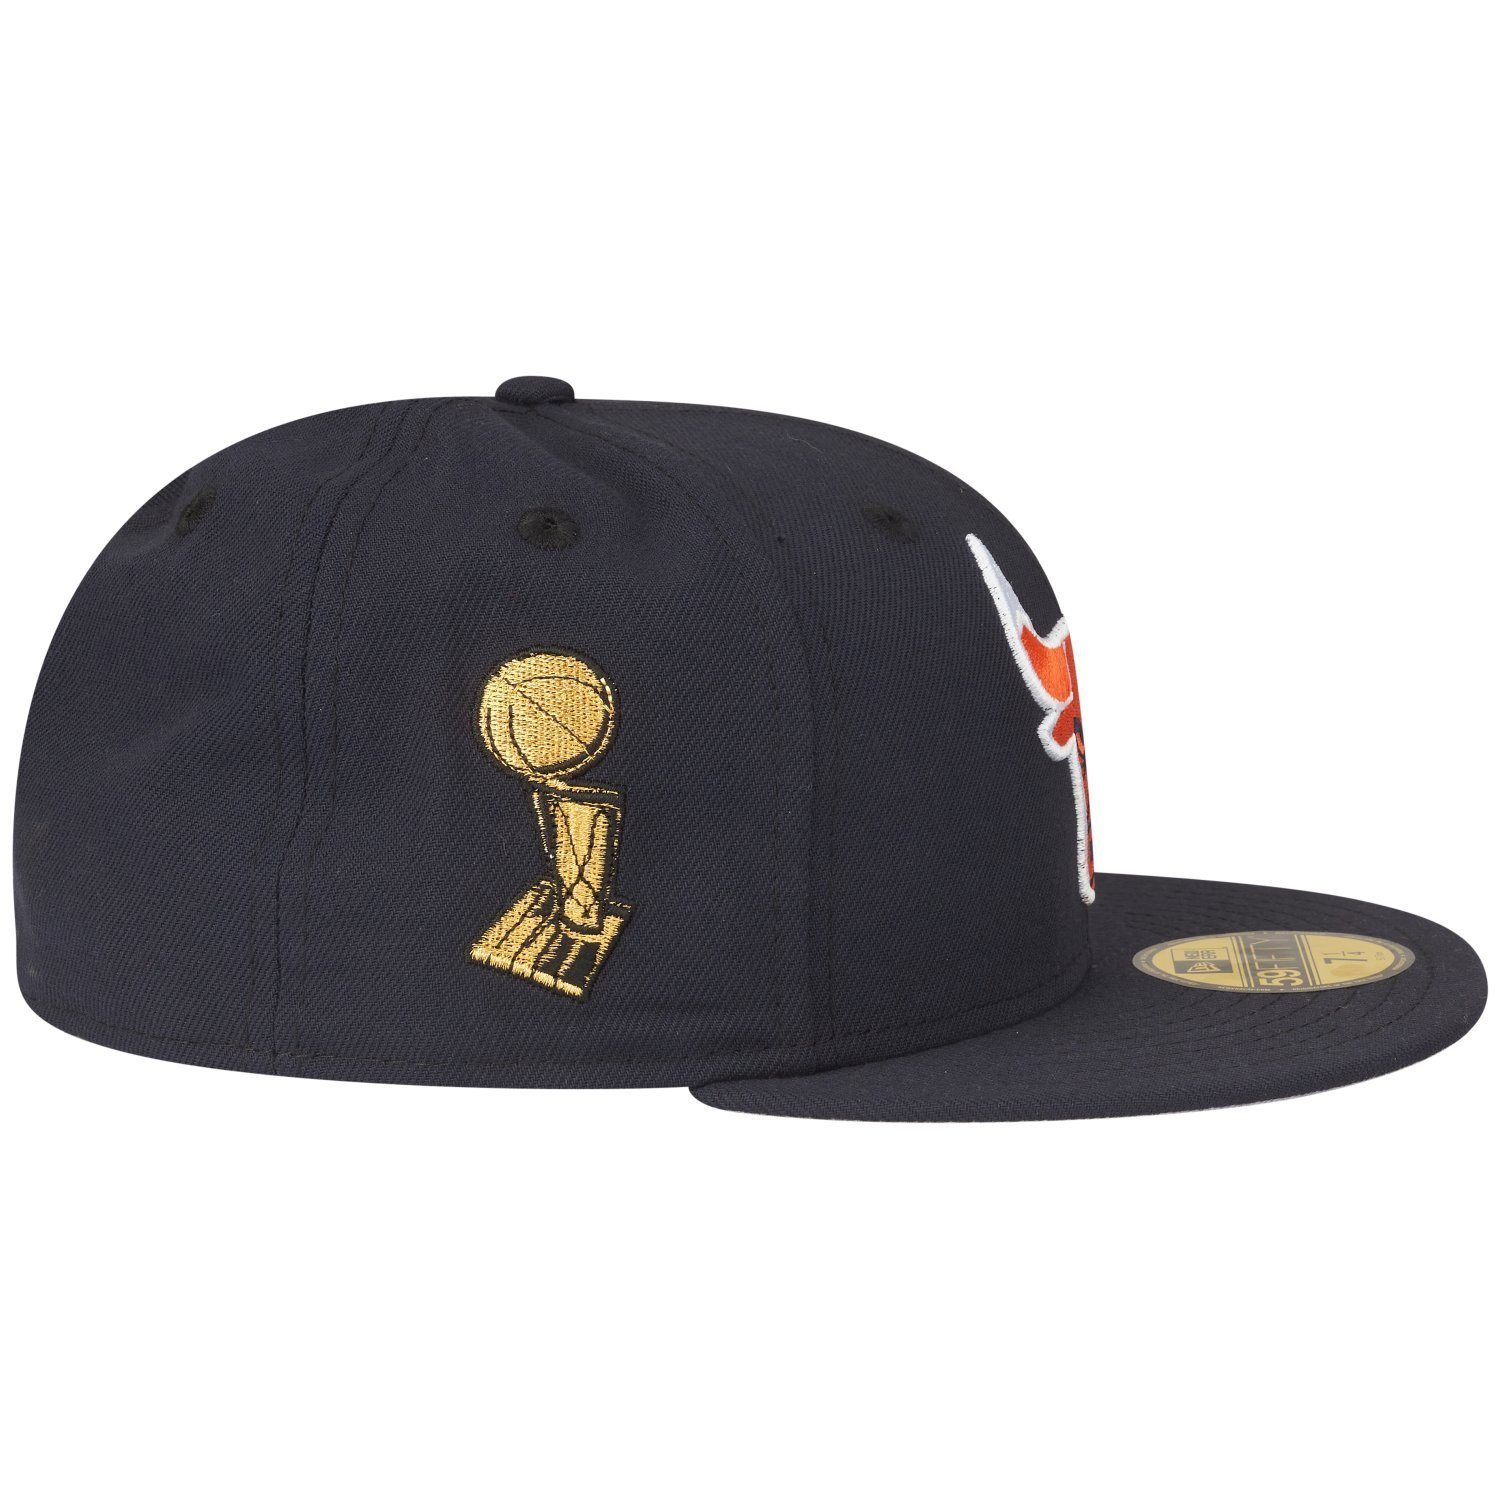 Bulls Cap Chicago 59Fifty Fitted New CHAMPS Era